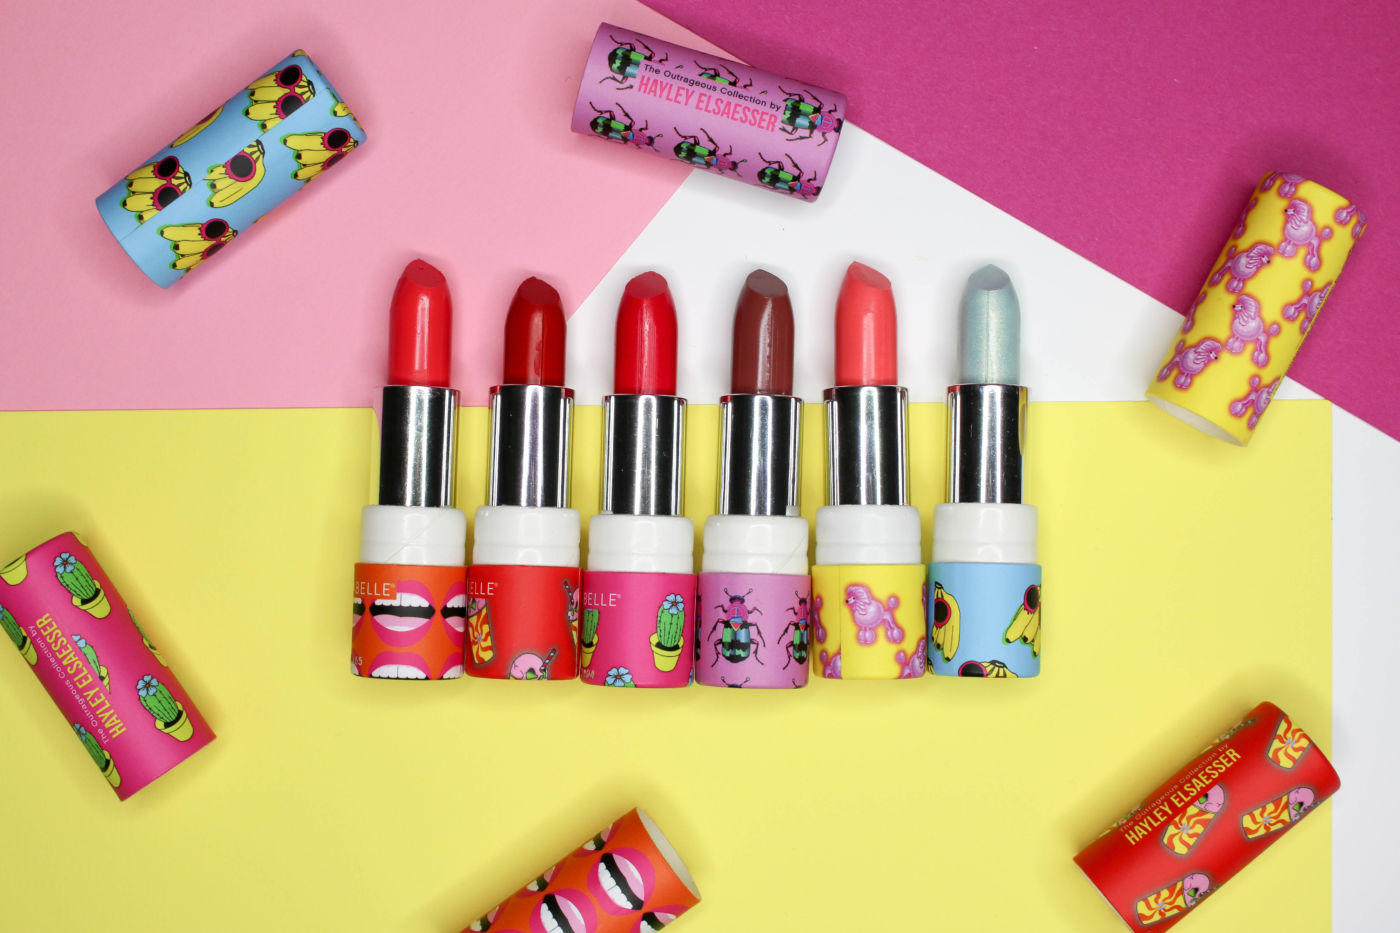 annabelle outrageous lipstick by hayley elsaesser, hayley elsaesser makeup, hayley elsaesser lipstick, hayley elsaesser x annabelle, canadian designer, canadian fashion designer, canadian makeup company, spring 2018 makeup, spring 2018 lipstick, annabelle limited edition collection